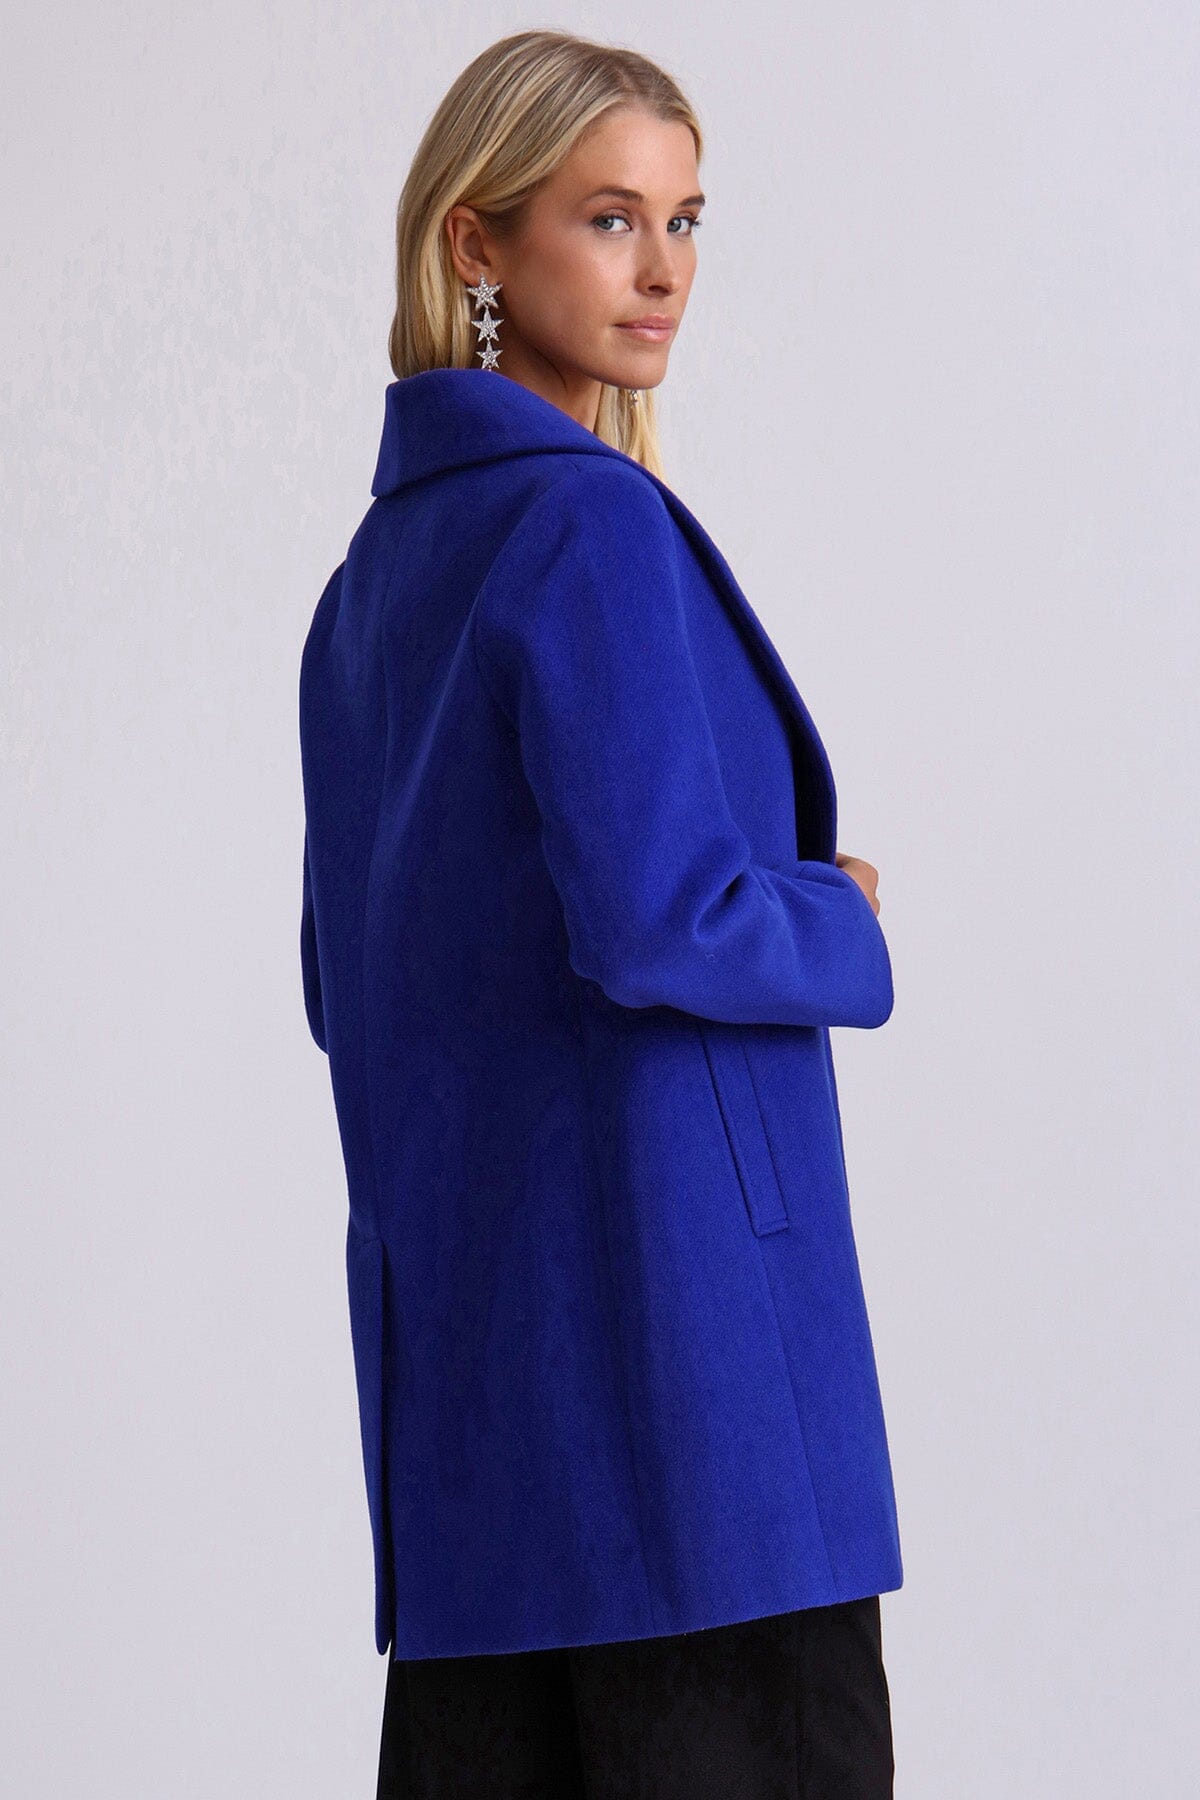 Cobalt blue twill wool blend shawl collar peacoat coat jacket - figure flattering office to date night peacoats outerwear for women